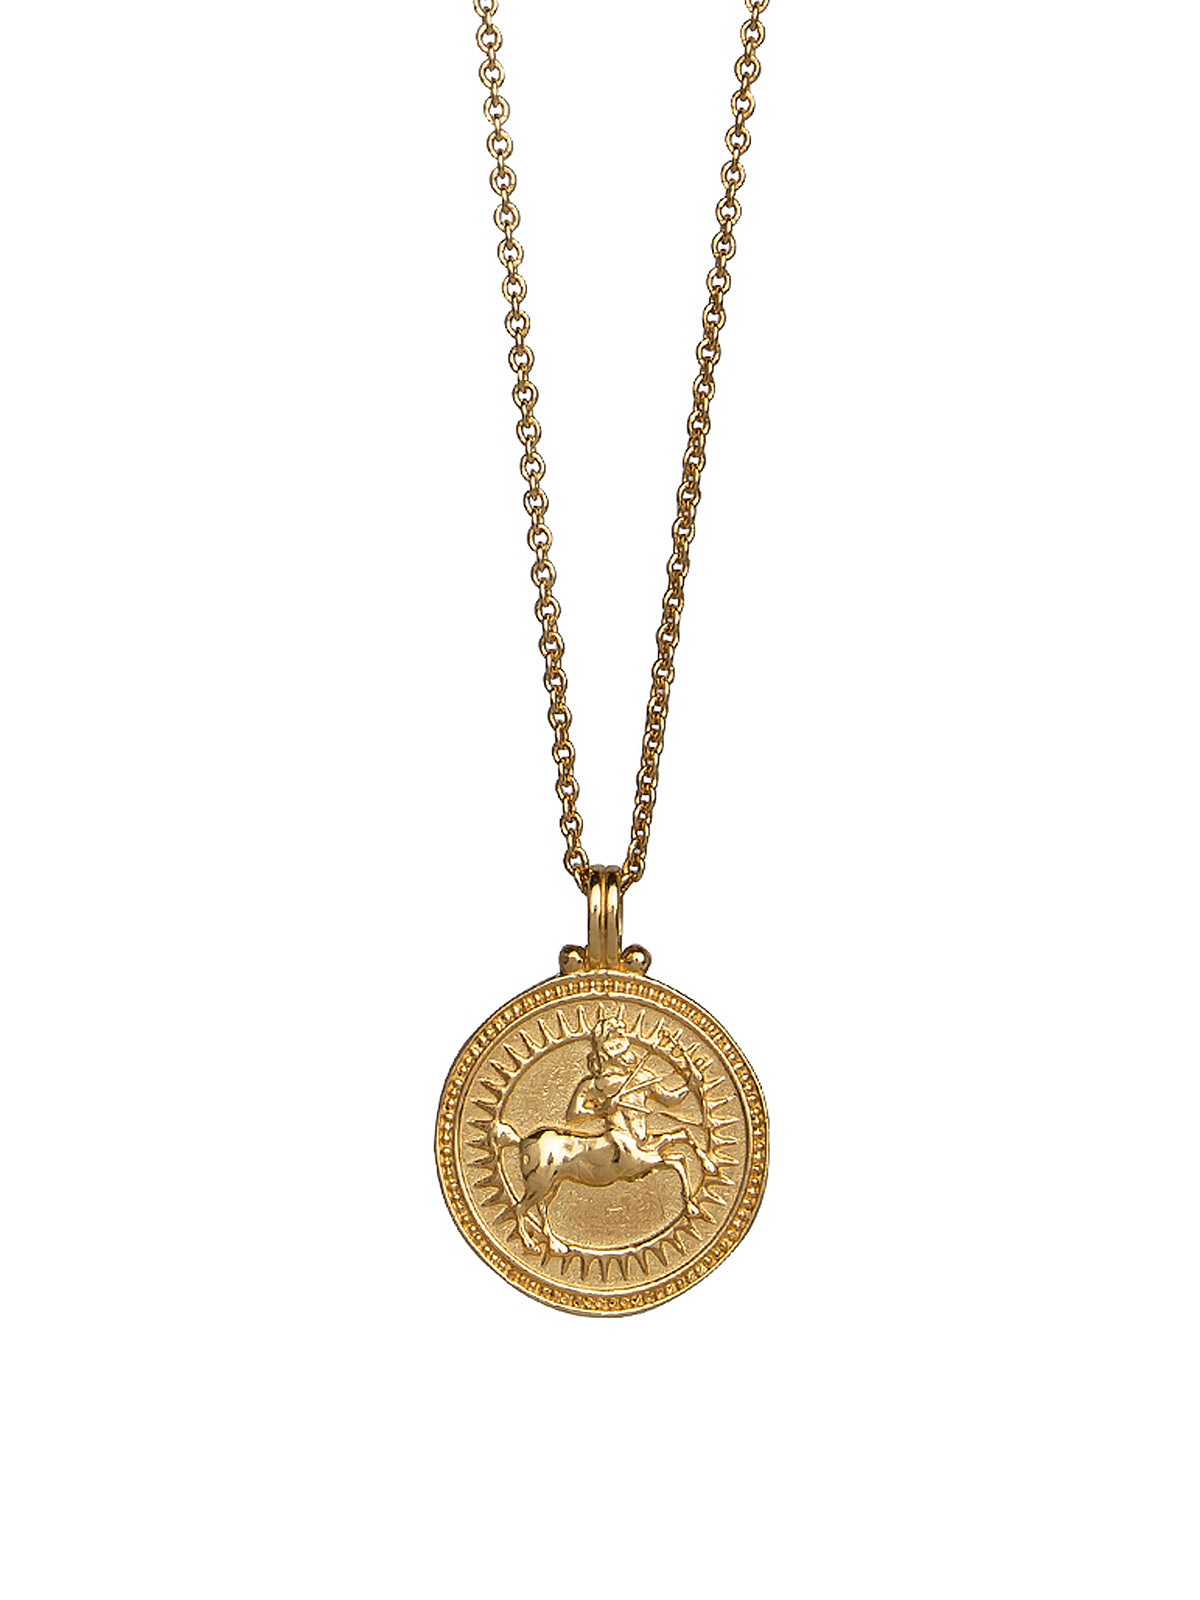 Sagittarius. 18ct Solid Gold Star Sign Necklace. The pendant features an Evil Eye on the back to ward off any naughty behavior aimed at you, Our logo and the 750 Hallmark for 18ct Gold.